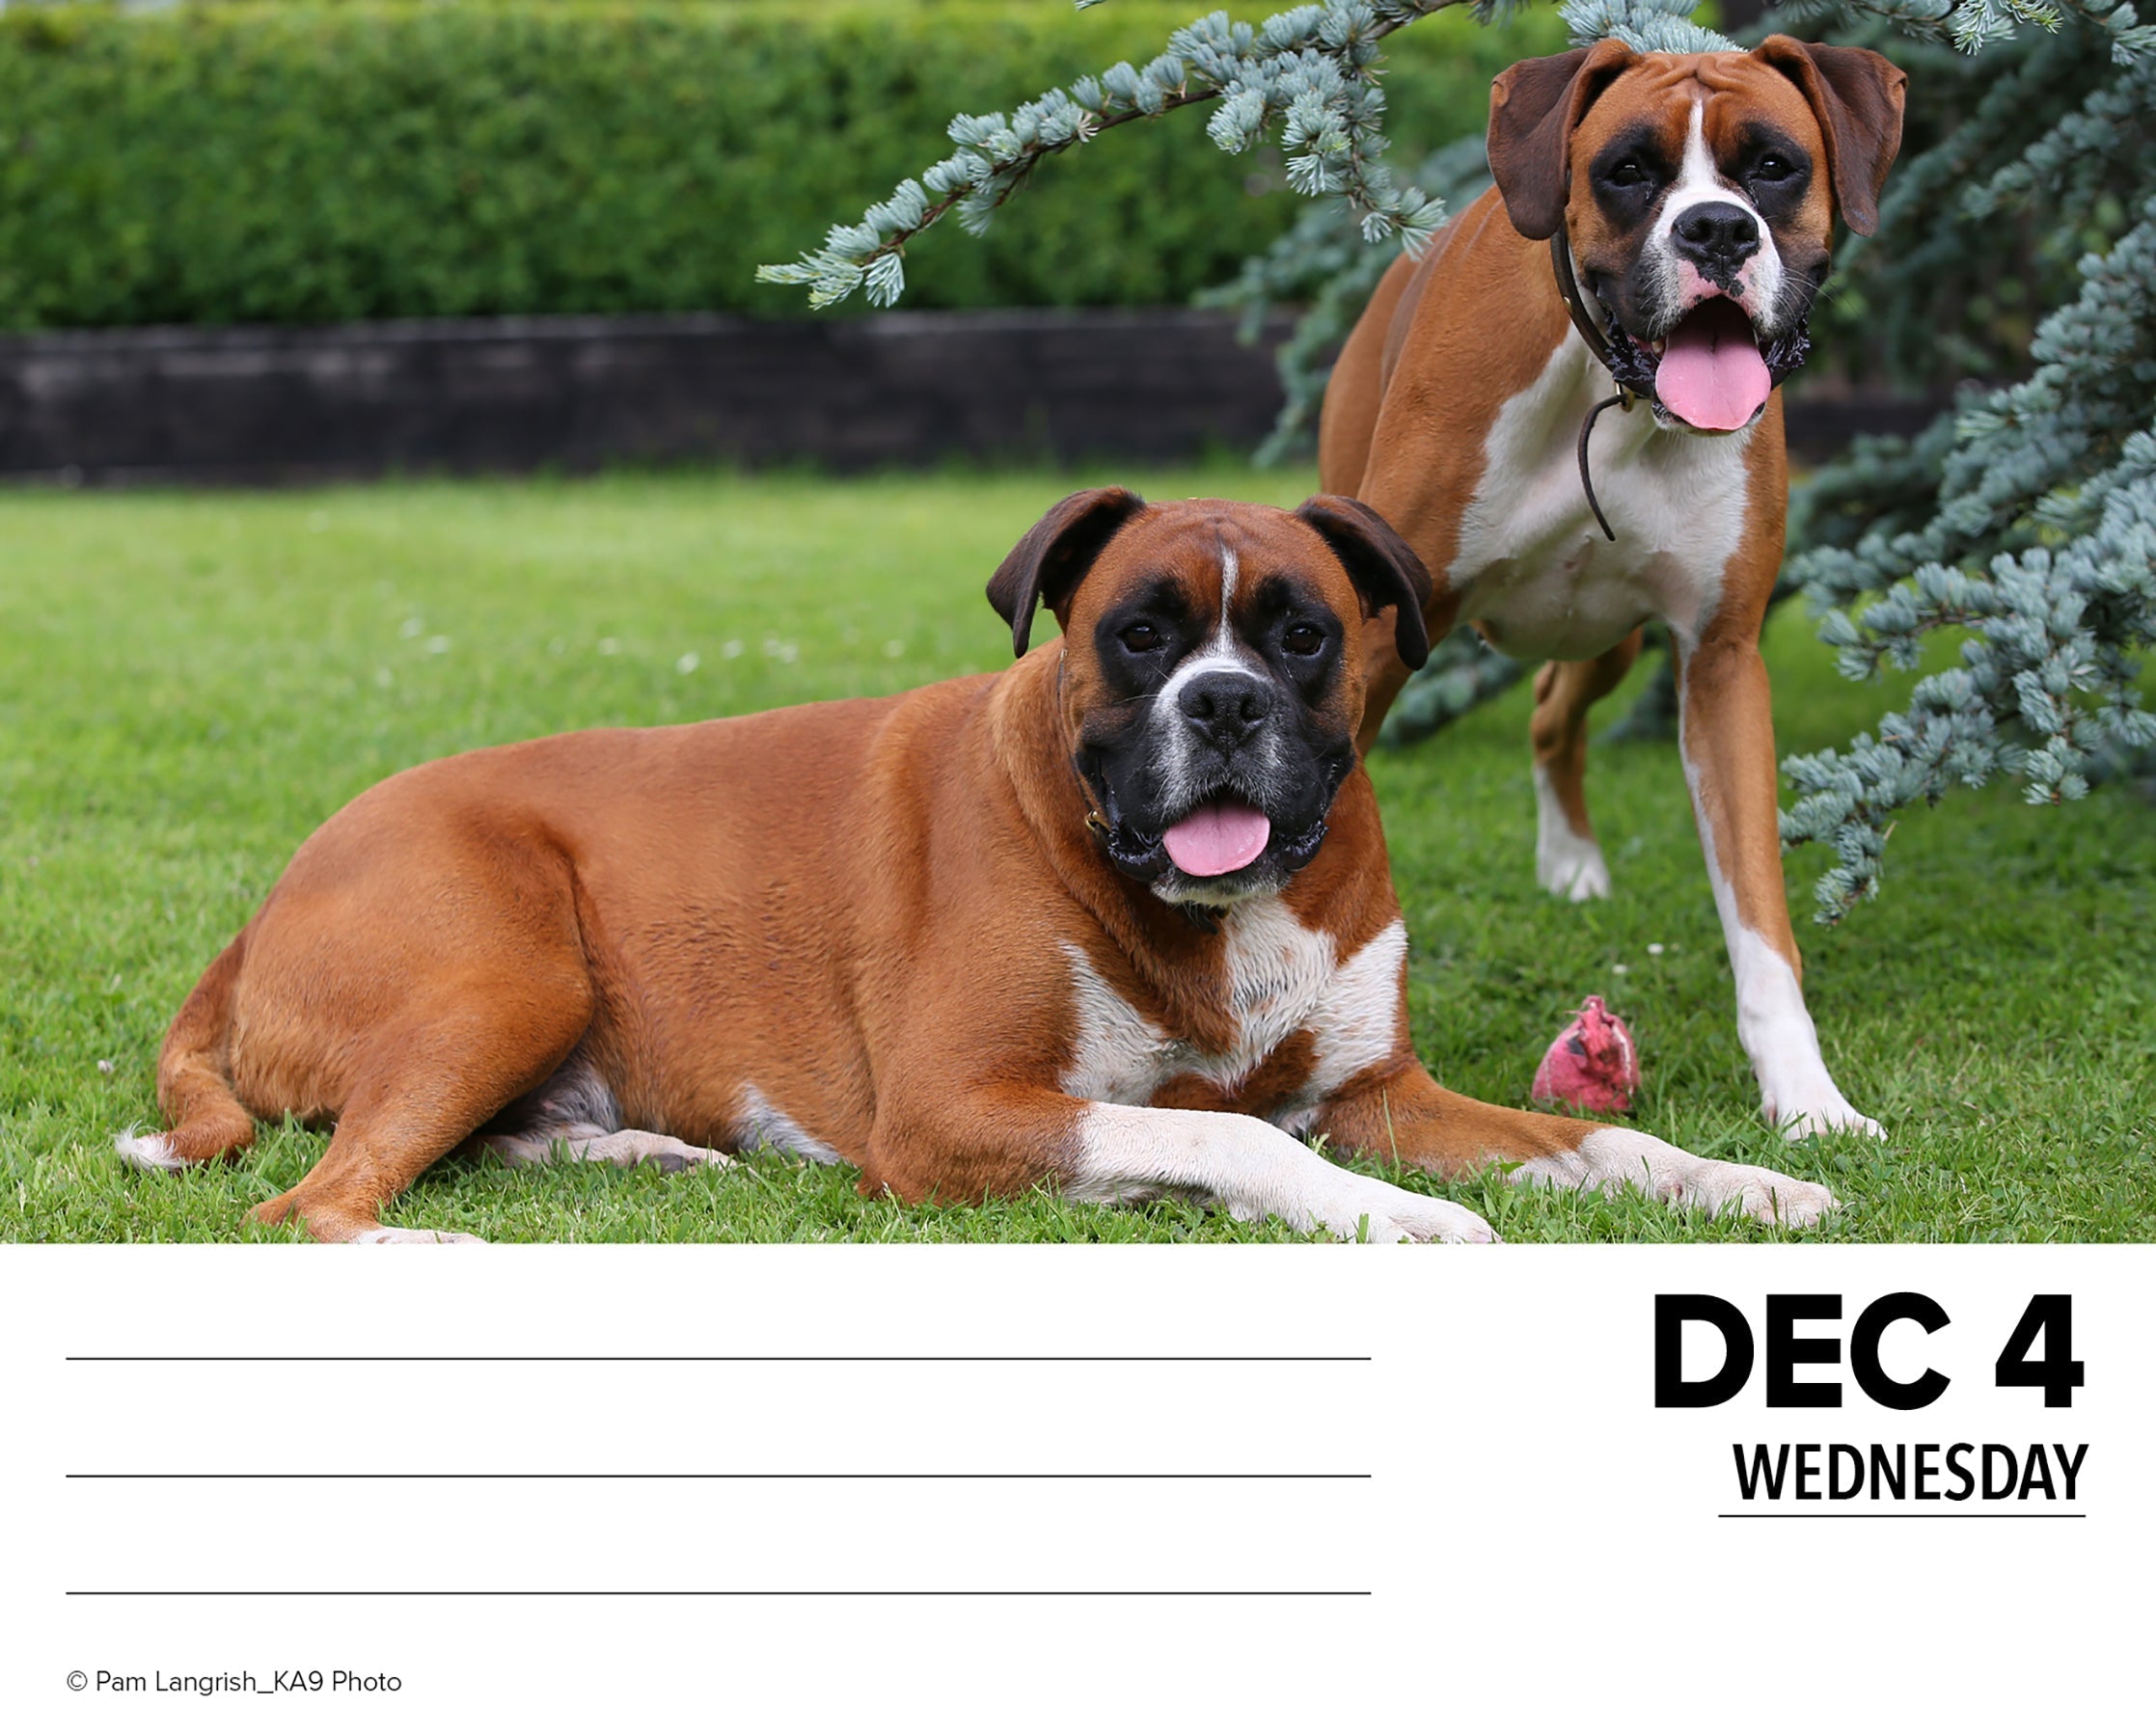 2024 Boxers - Boxed Page A Day Calendar